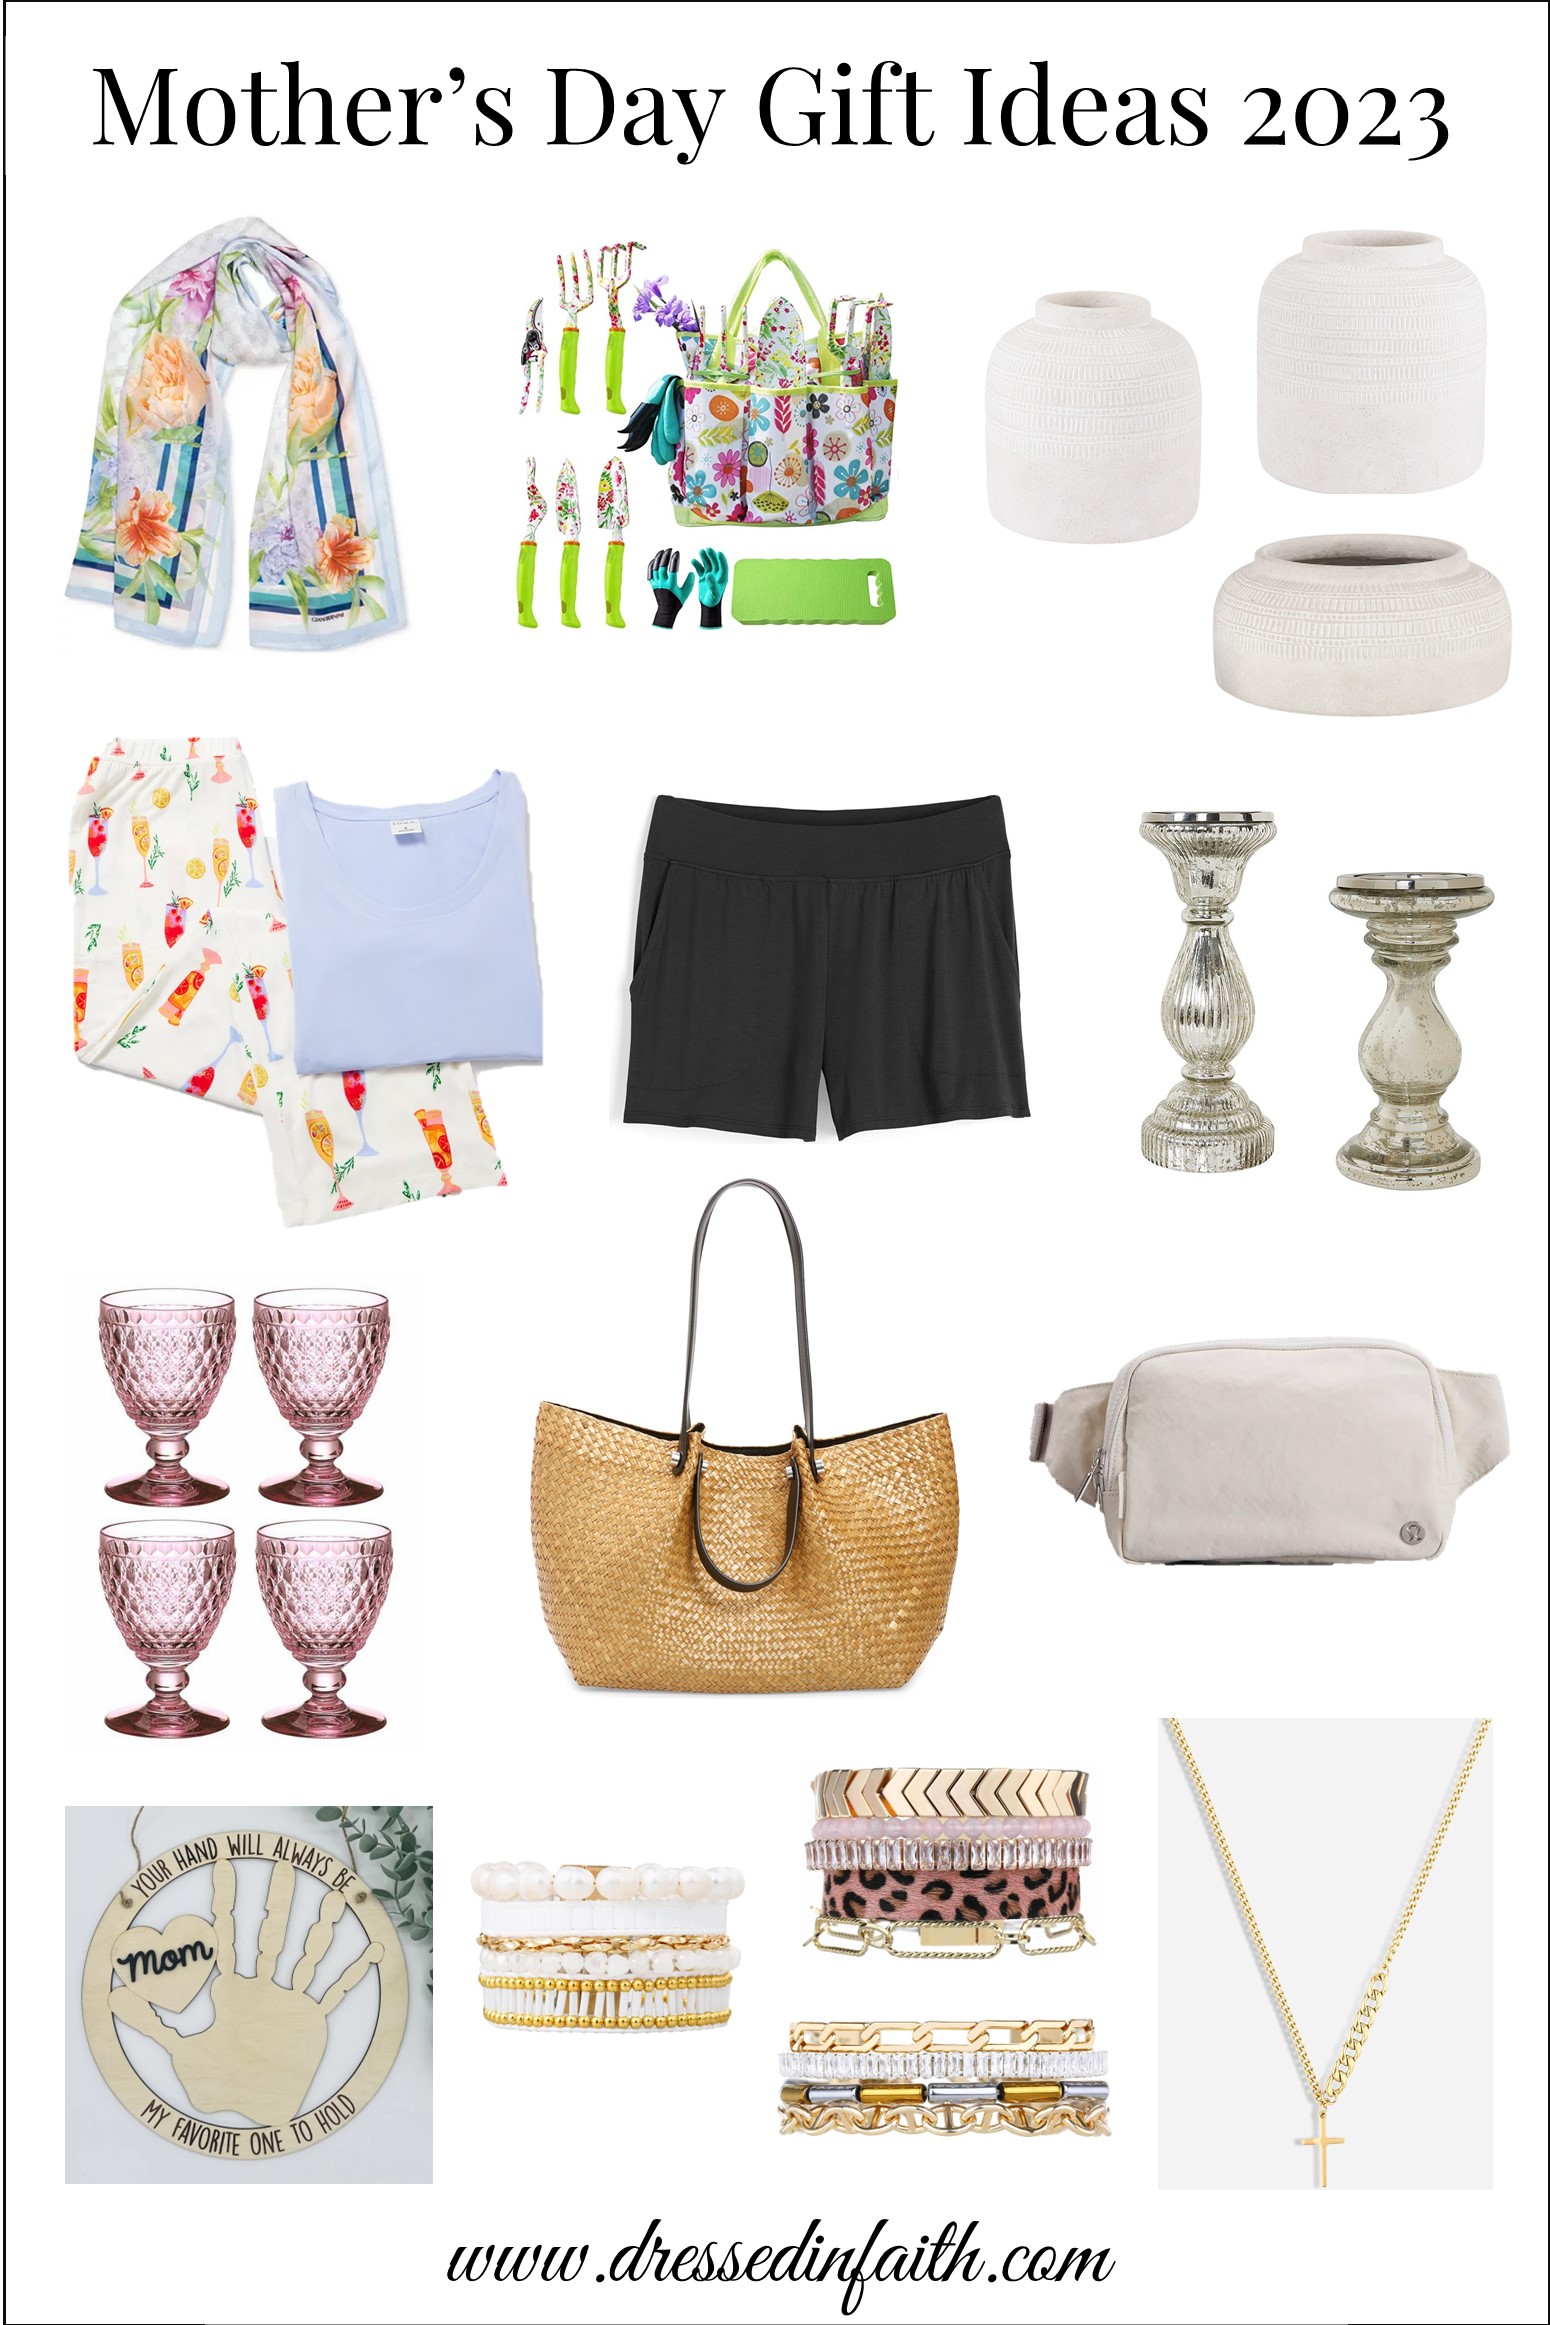 Mother's Day Gift Ideas 2023 - Dressed in Faith